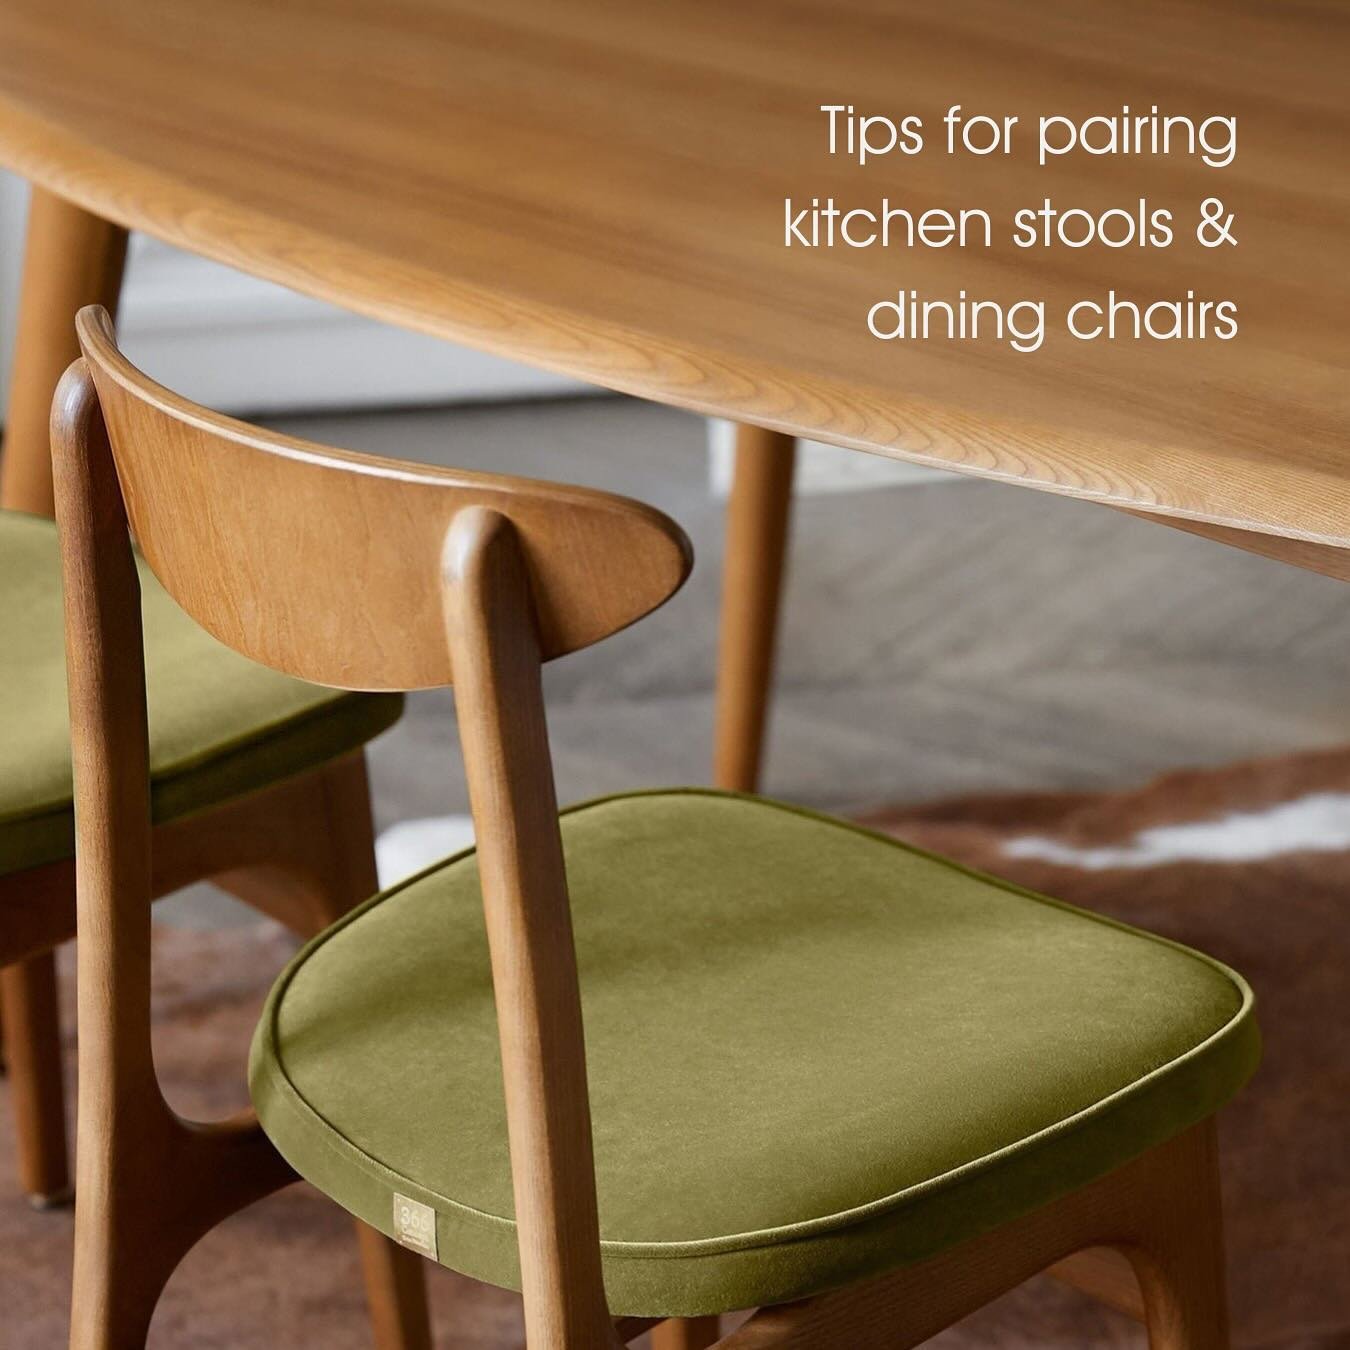 Ever wondered how to seamlessly blend kitchen stools and dining chairs in your home? Our tips for pairing kitchen stools &amp; dining chairs blog post delves into expert tips to help you achieve harmony and style in your space 🪑✨

Why is this a comm